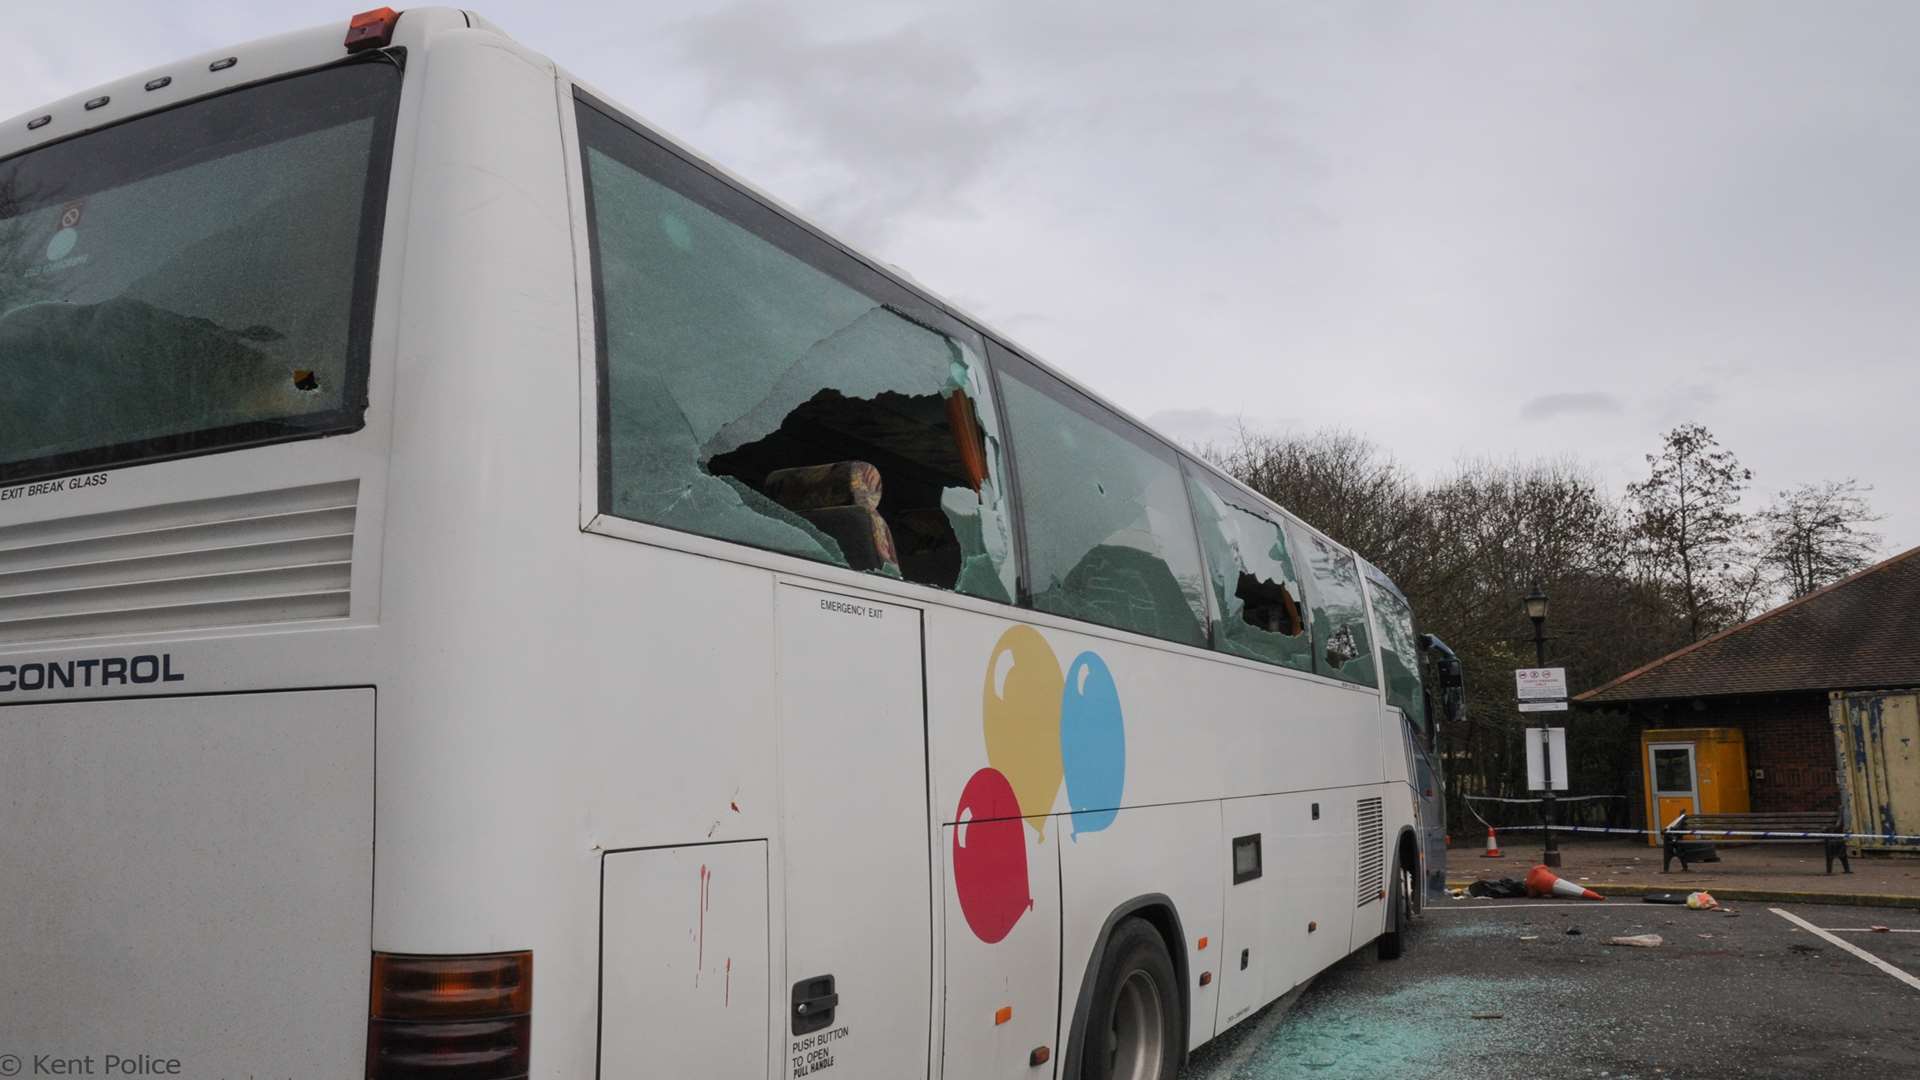 The coach damaged after violence took hold at Maidstone Services off the M20